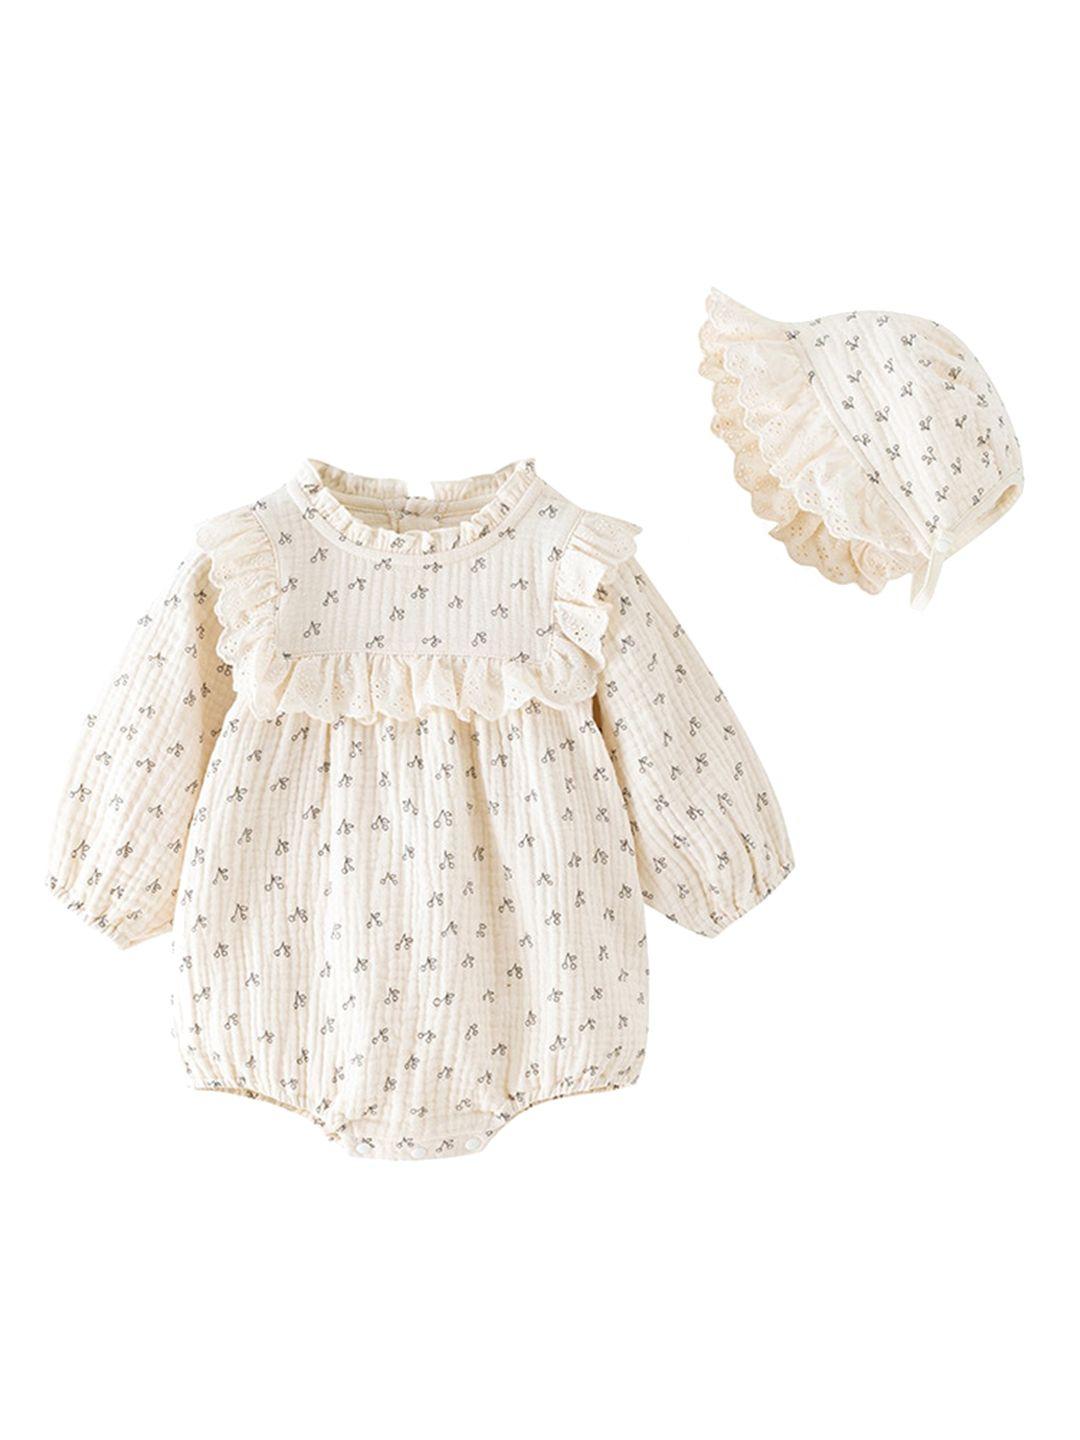 stylecast-beige-infants-girls-printed-cotton-romper-with-cap